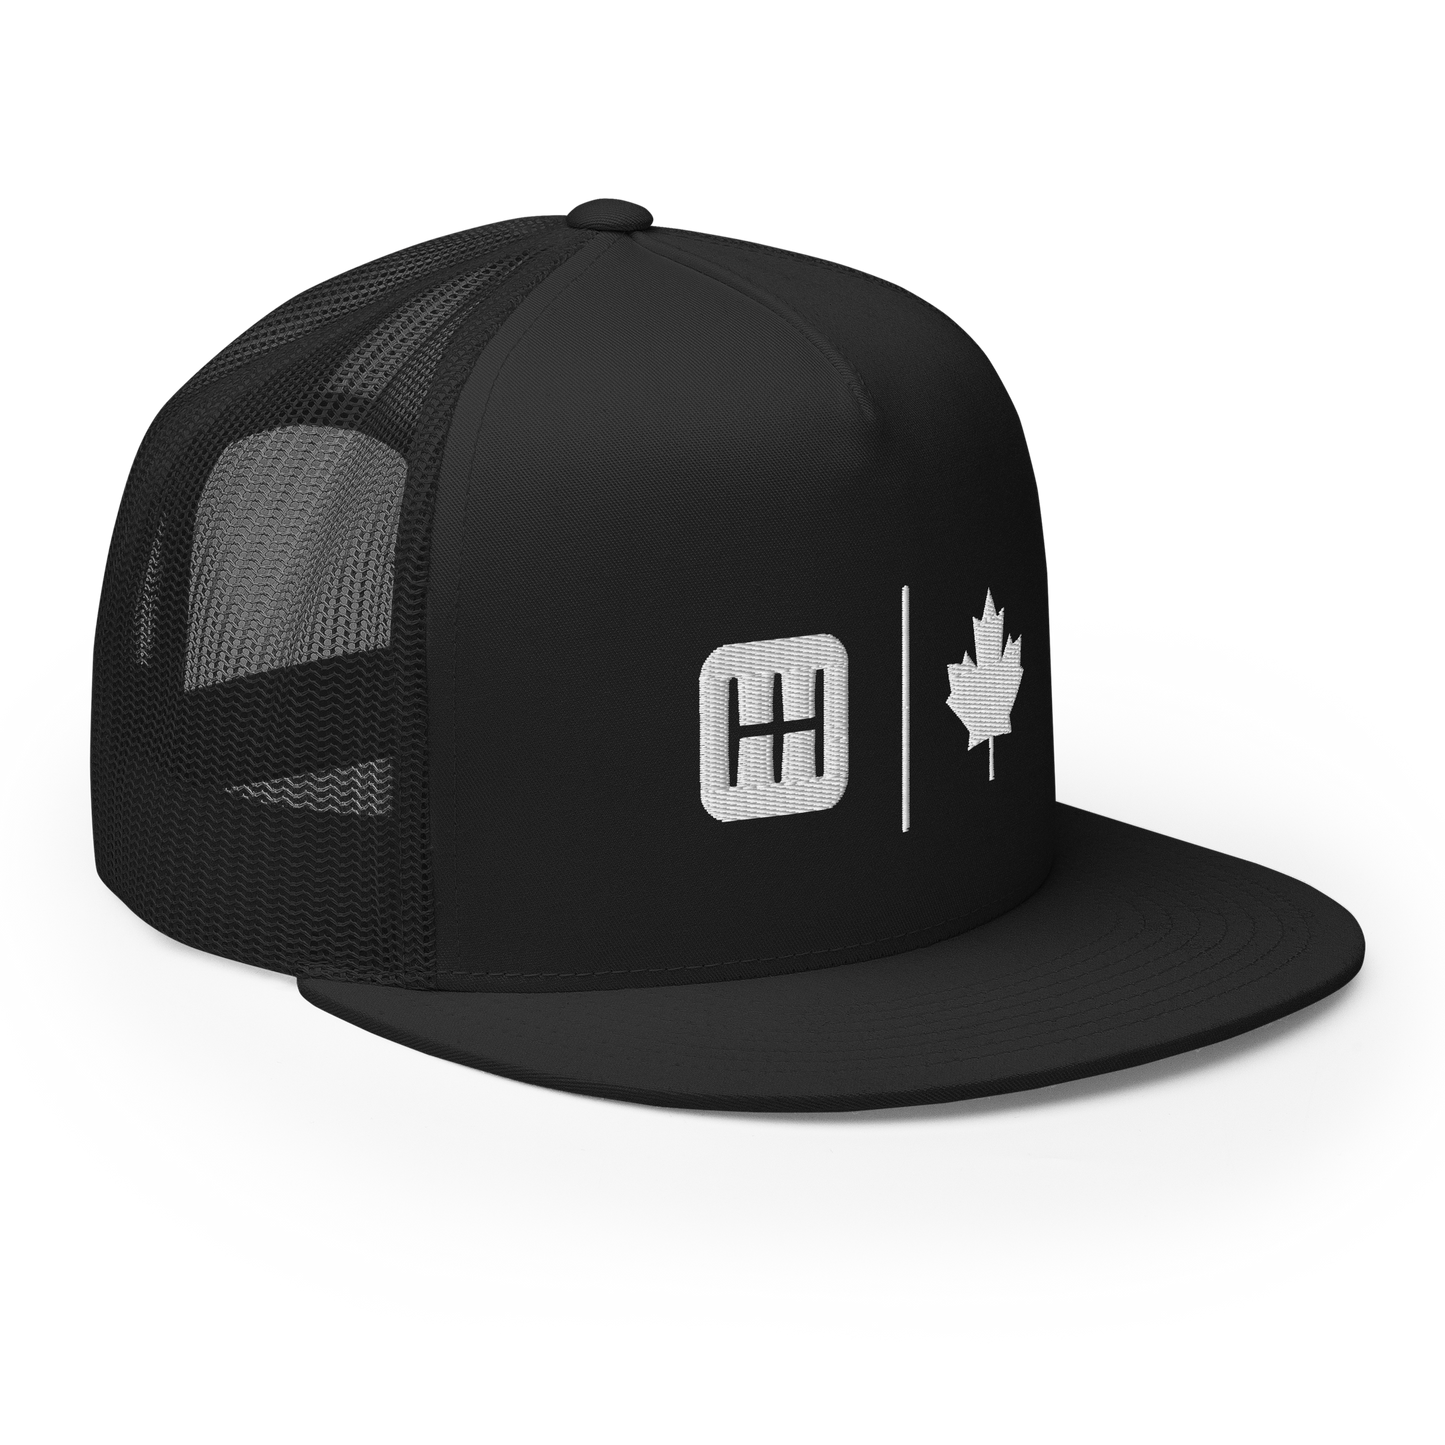 CNTR Team Canada Collection | Flat Trucker Hat